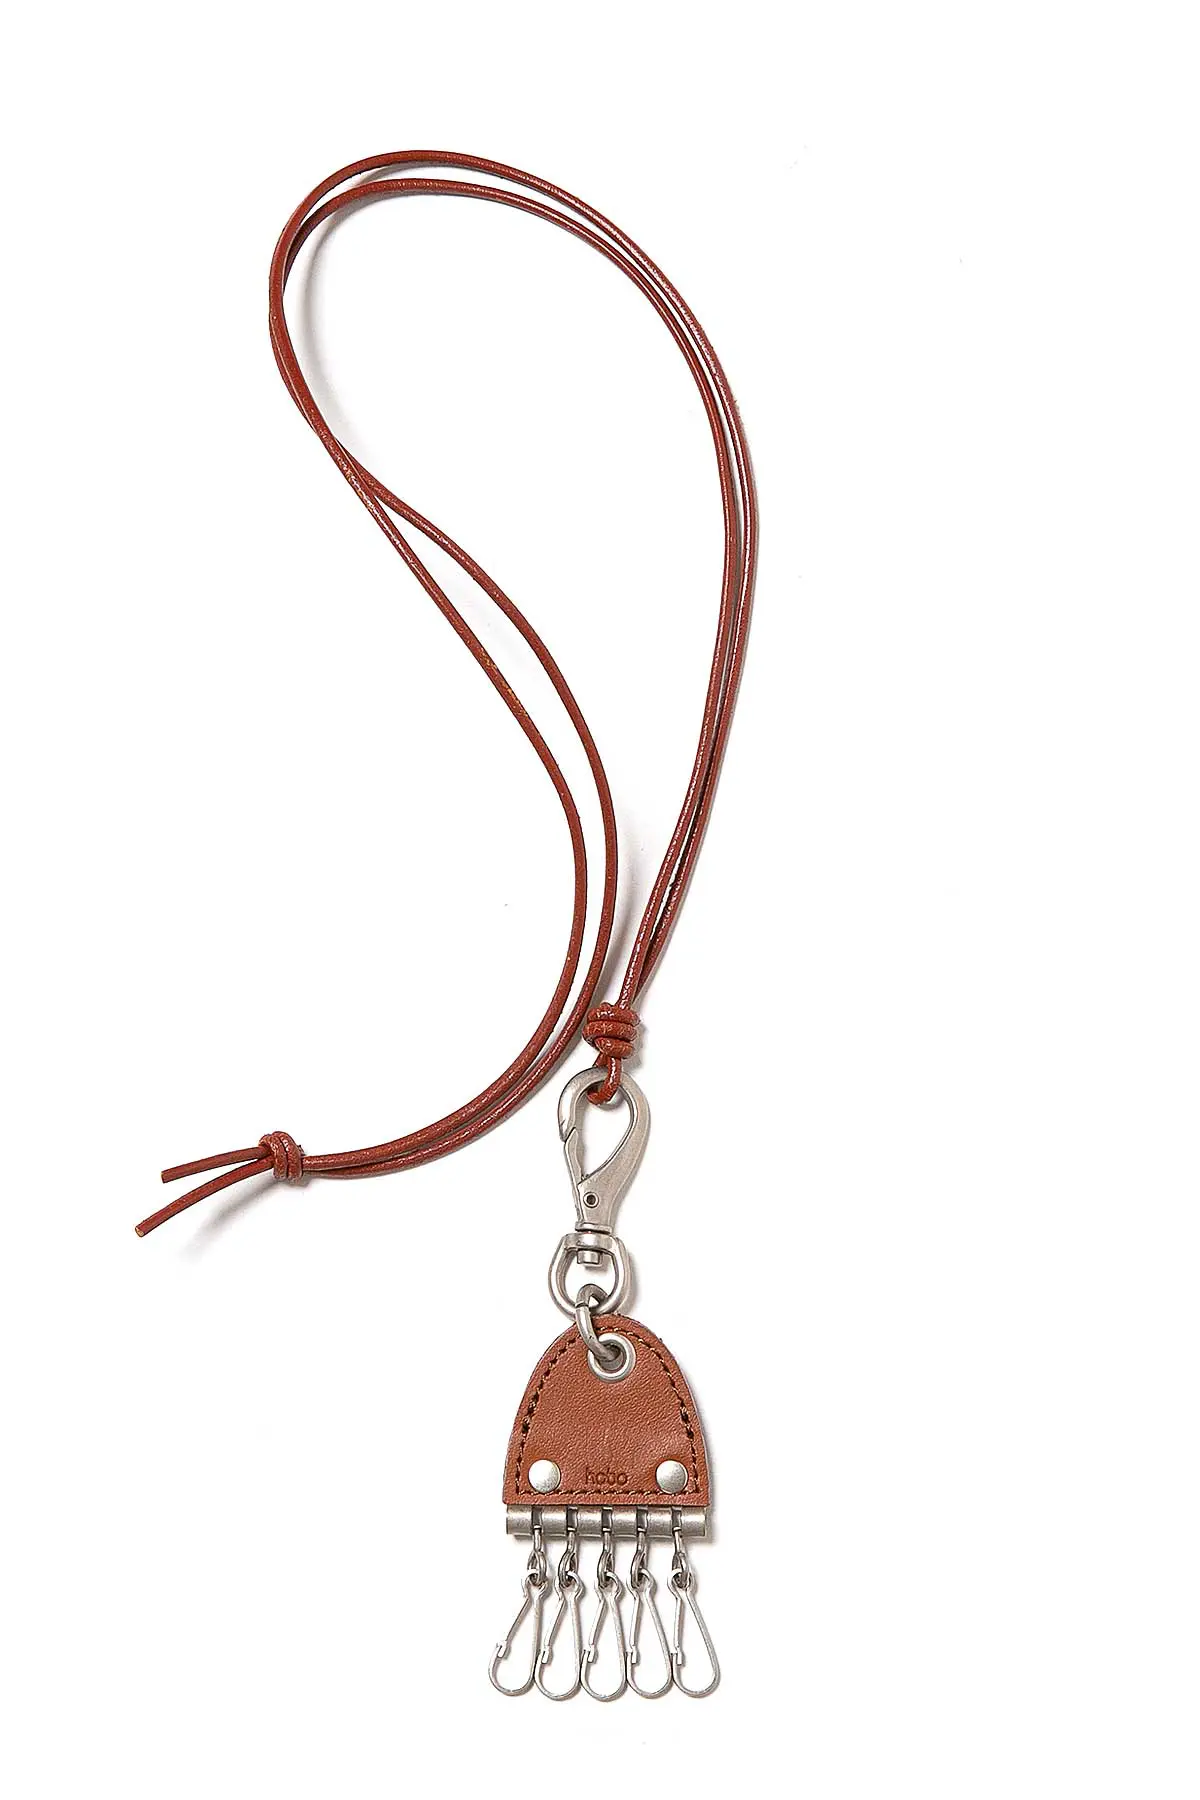 HOBO / 5 HOOKS KEY RING COW LEATHER CORD (Lt.Brown)